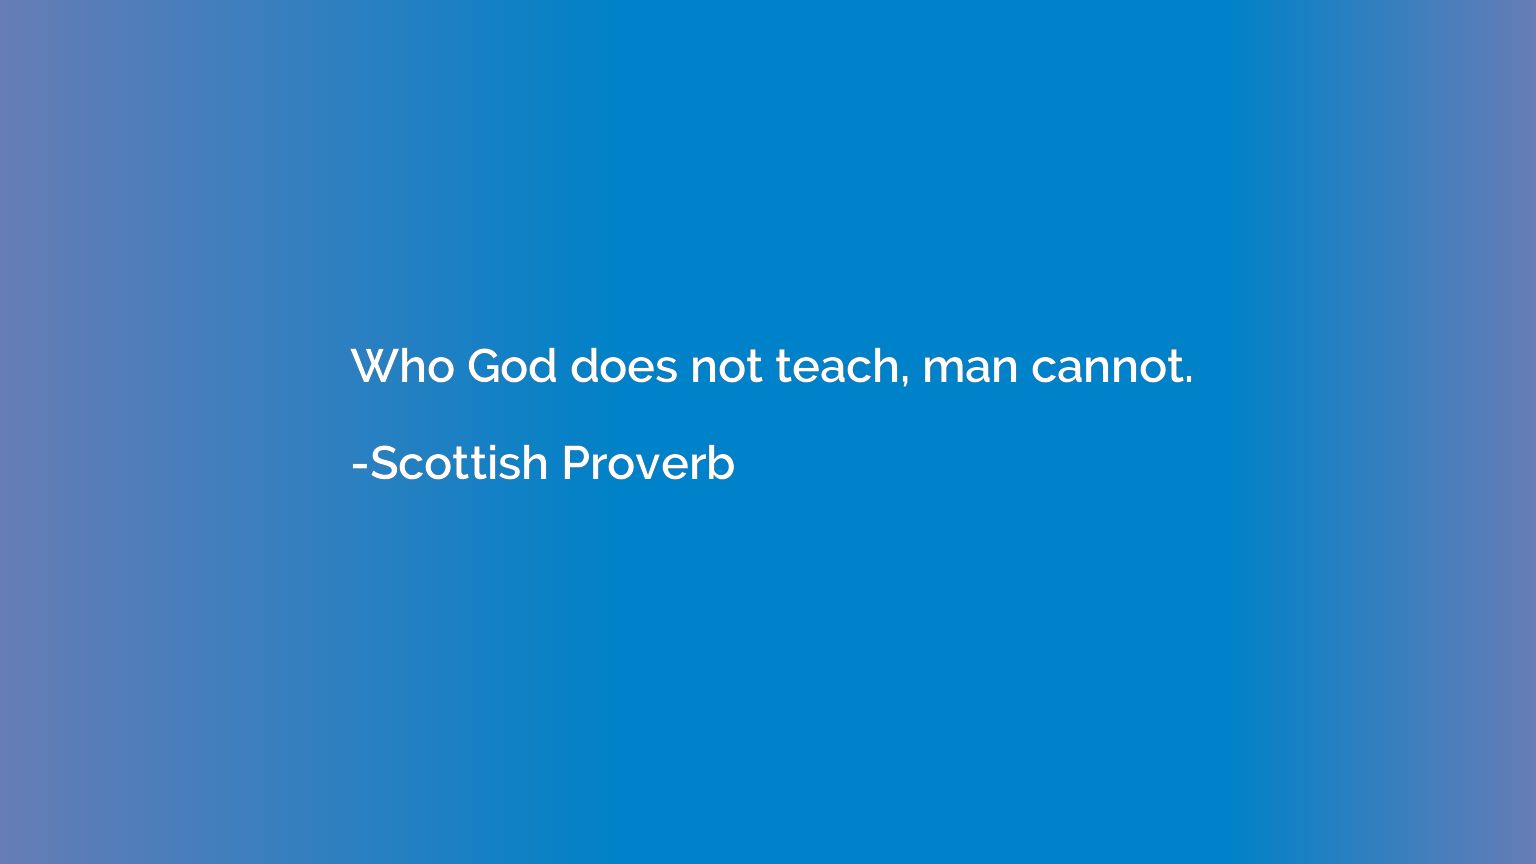 Who God does not teach, man cannot.